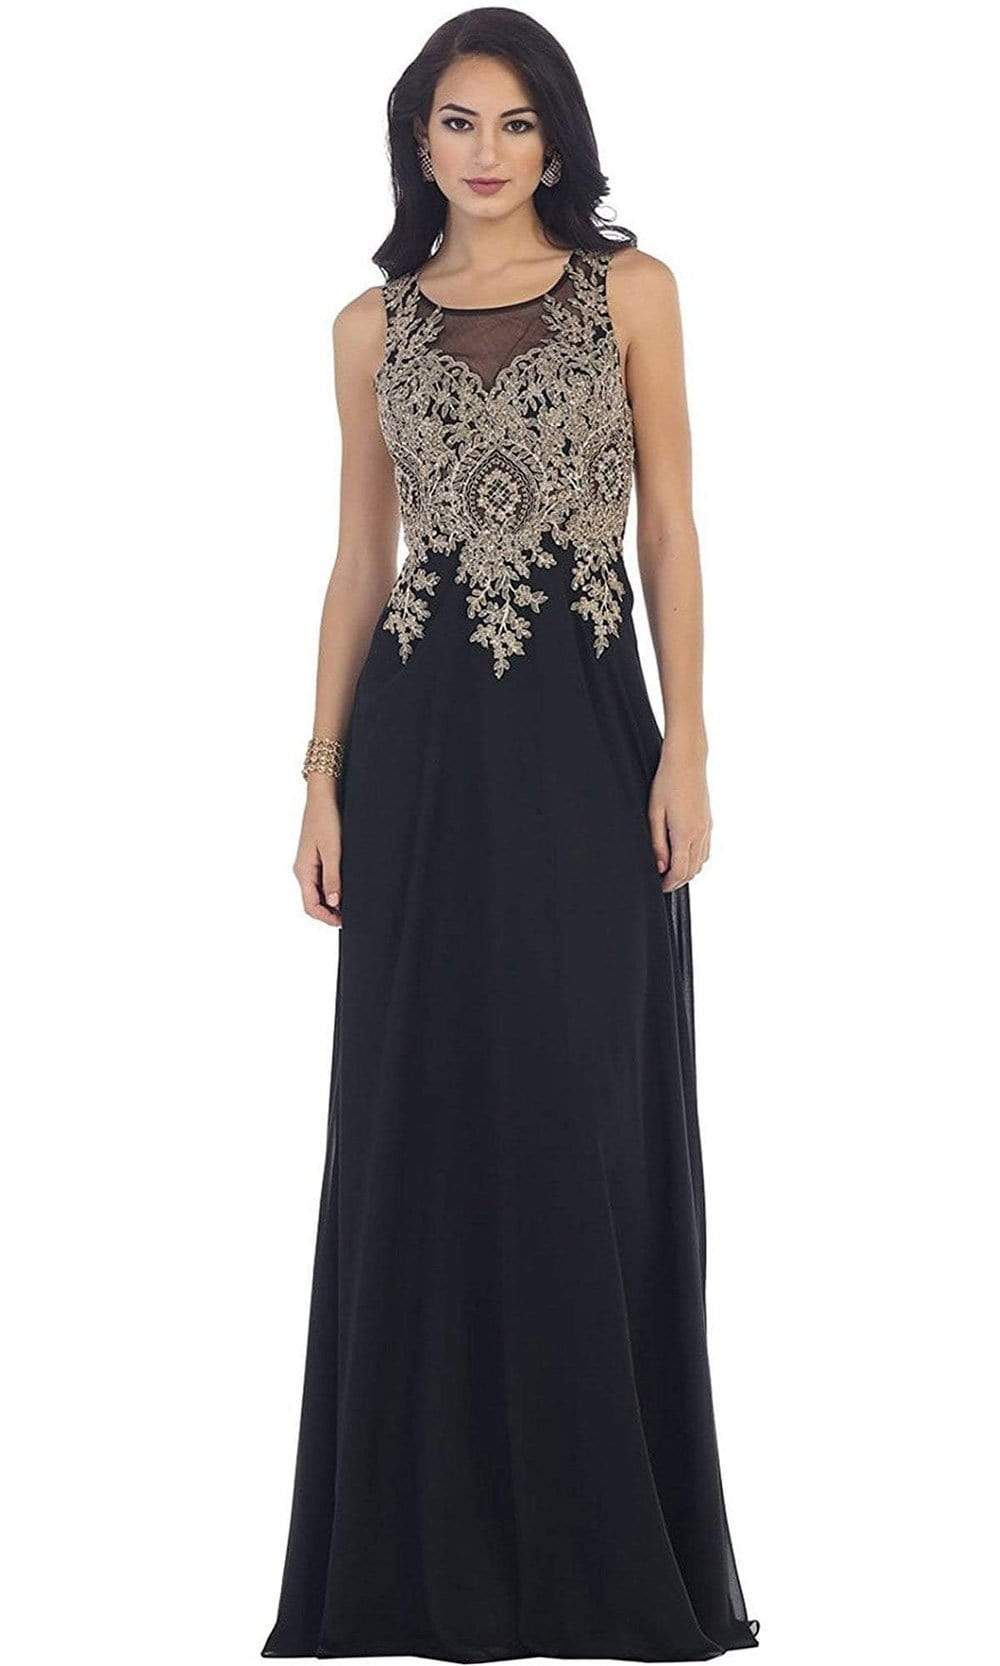 May Queen - Illusion Ornate Lace Prom Gown